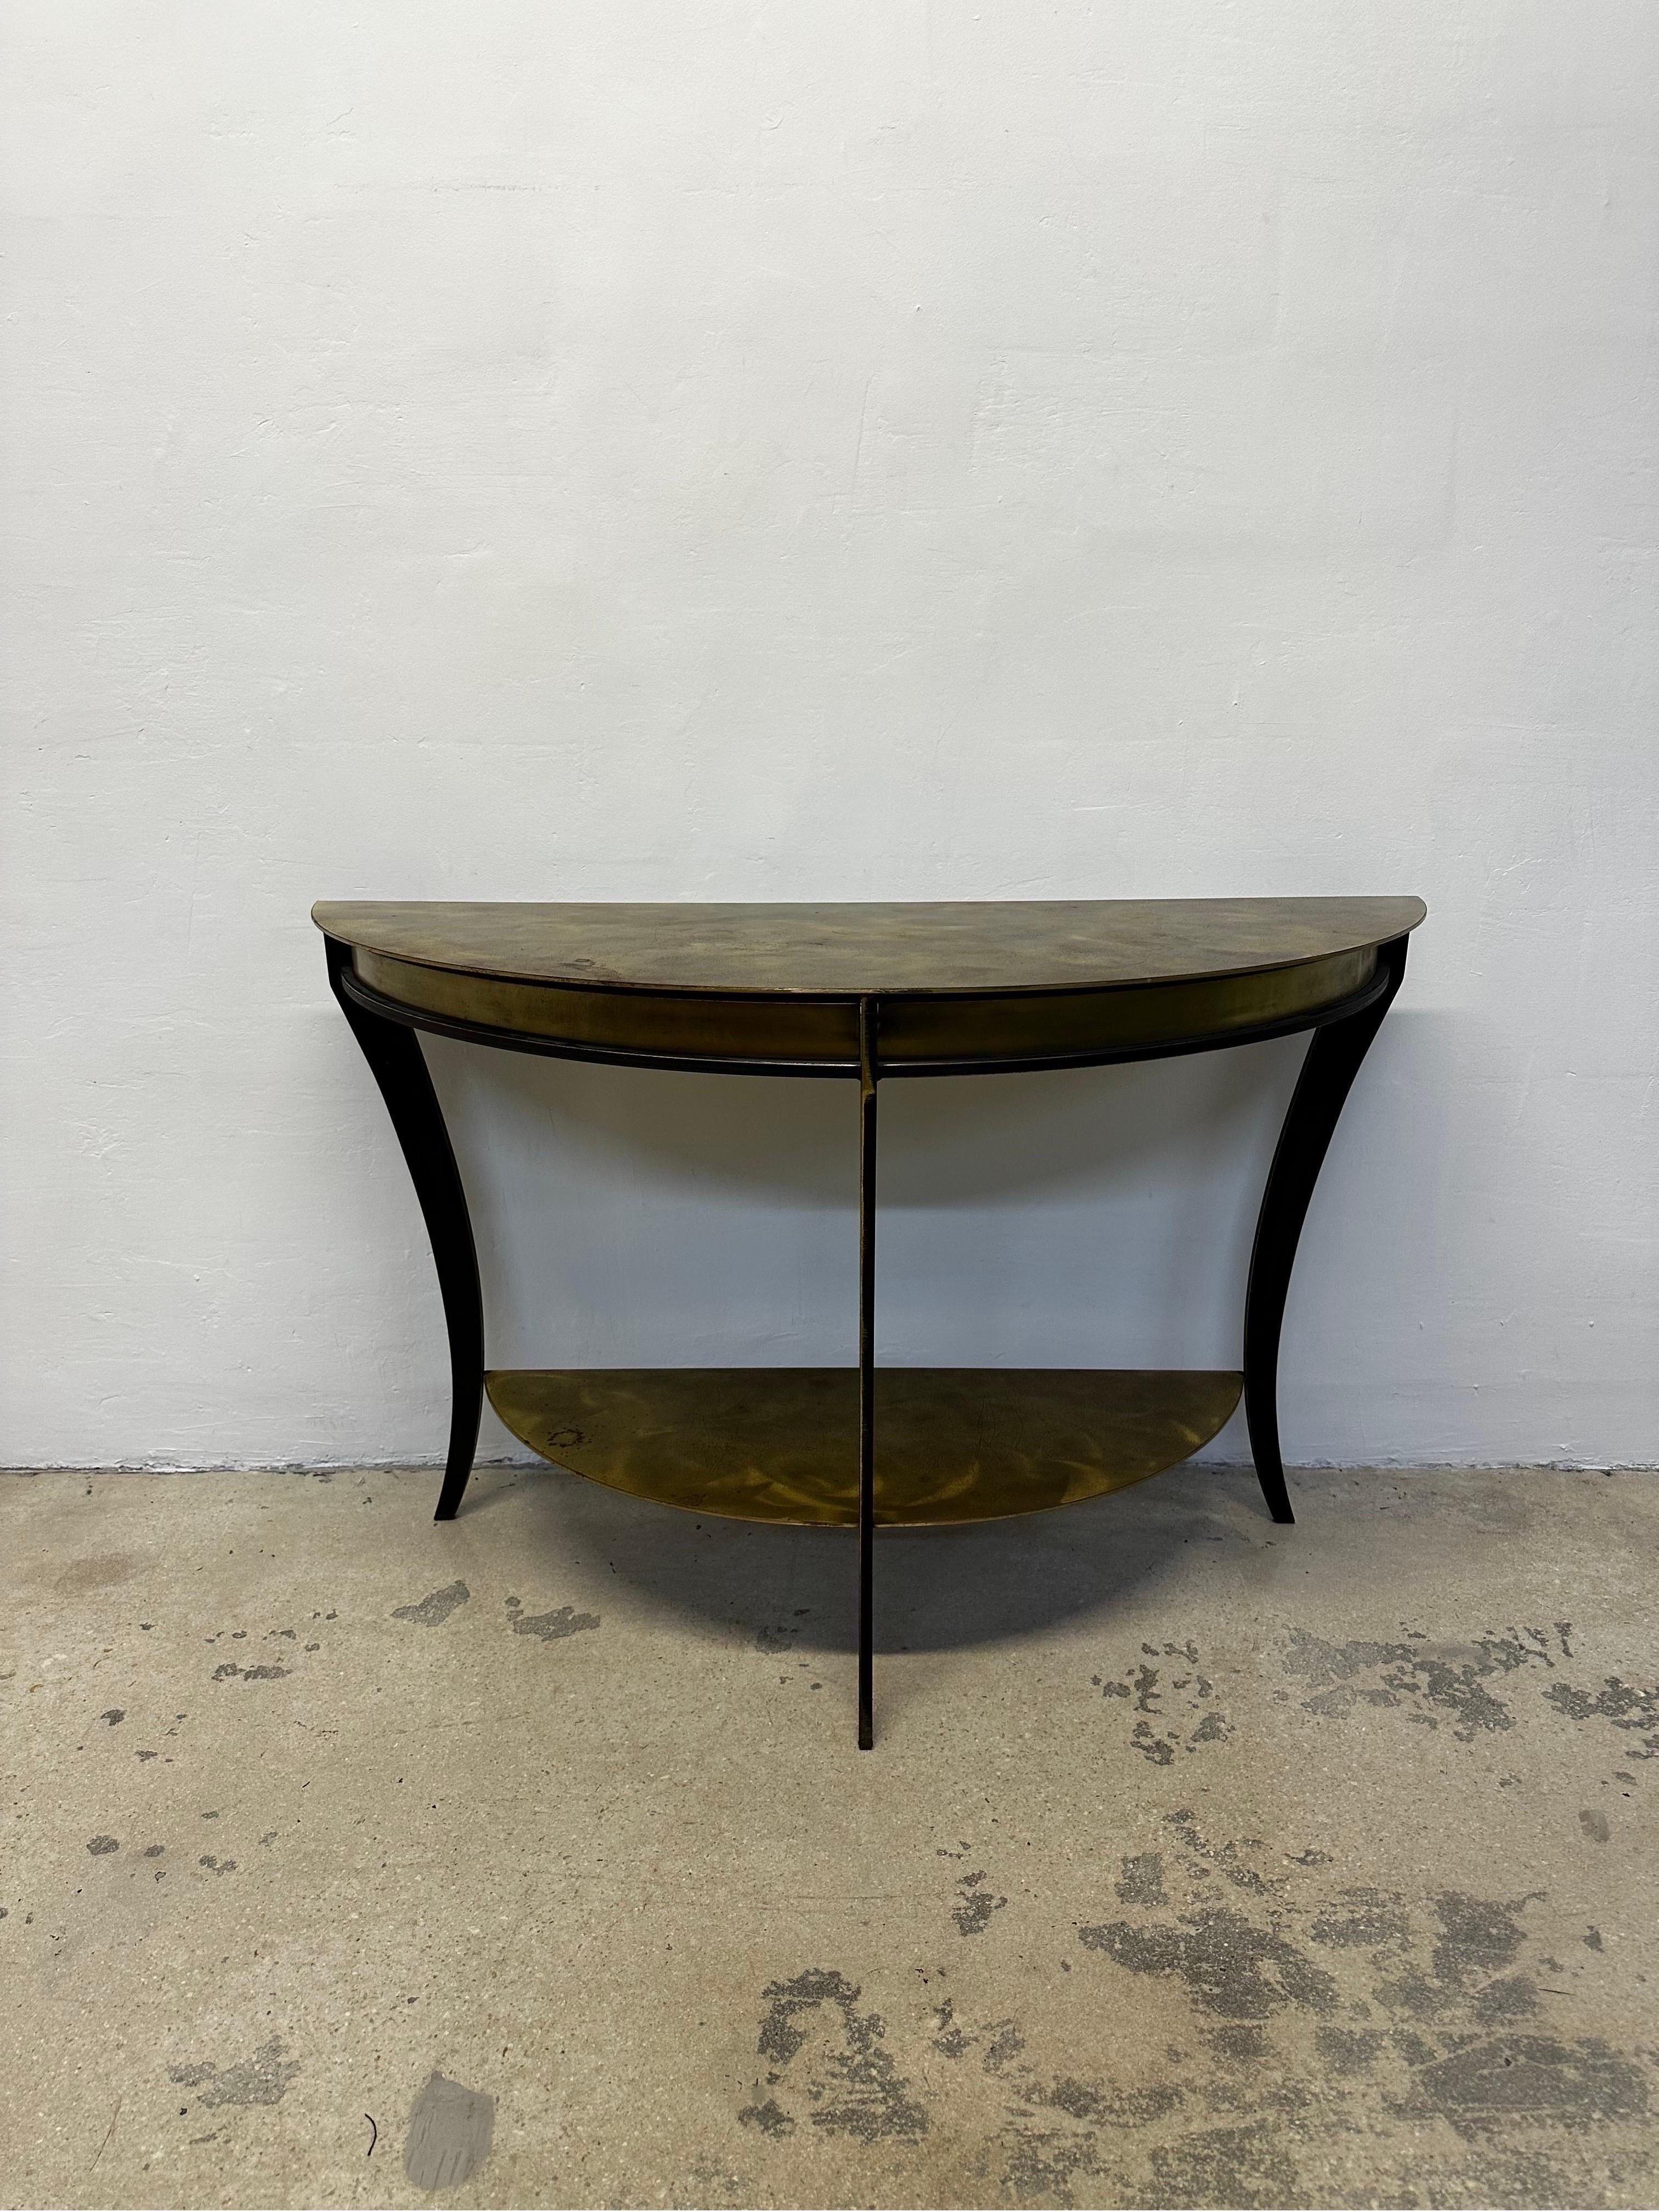 American Mid-Century Modern welded steel demilune console table with brass surfaces. The brass has a swirl effect and is patinated with age and use.